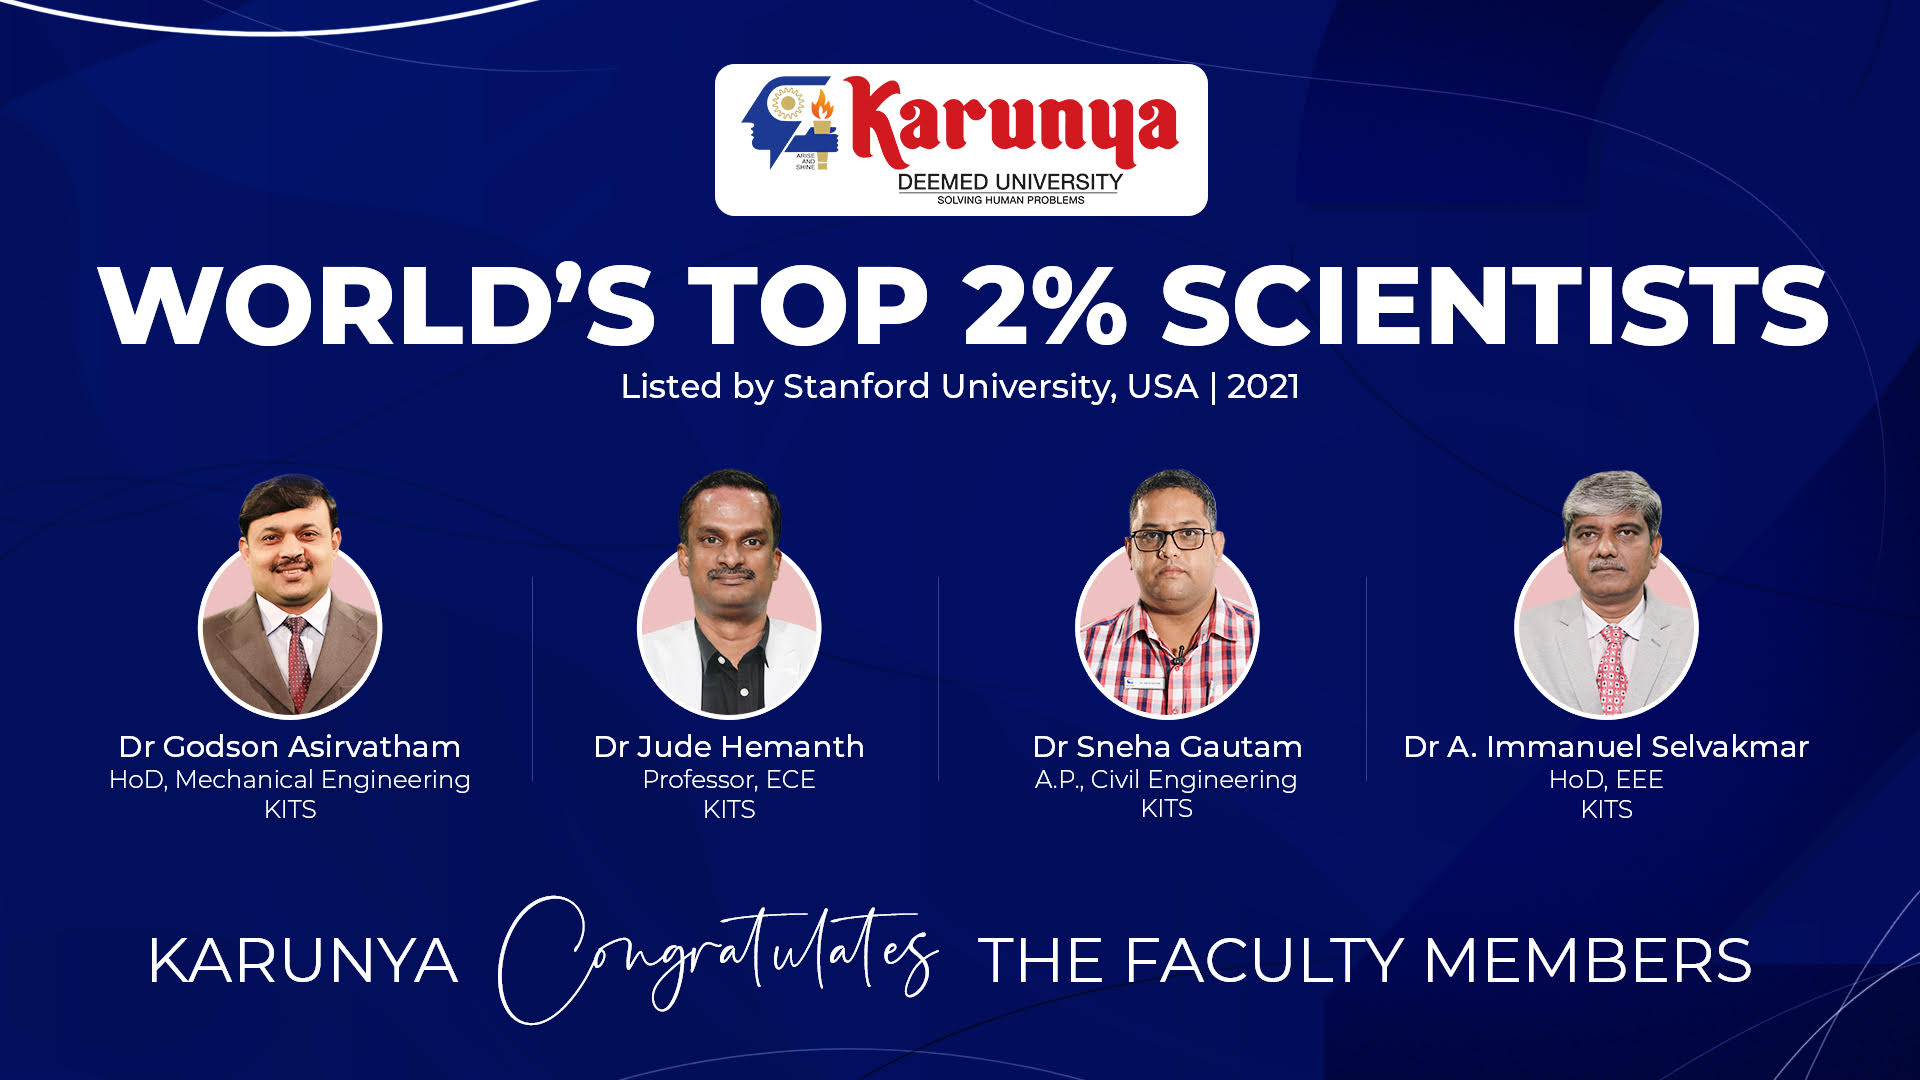 Top 2% Scientists in this world: By Stanford University, 2021